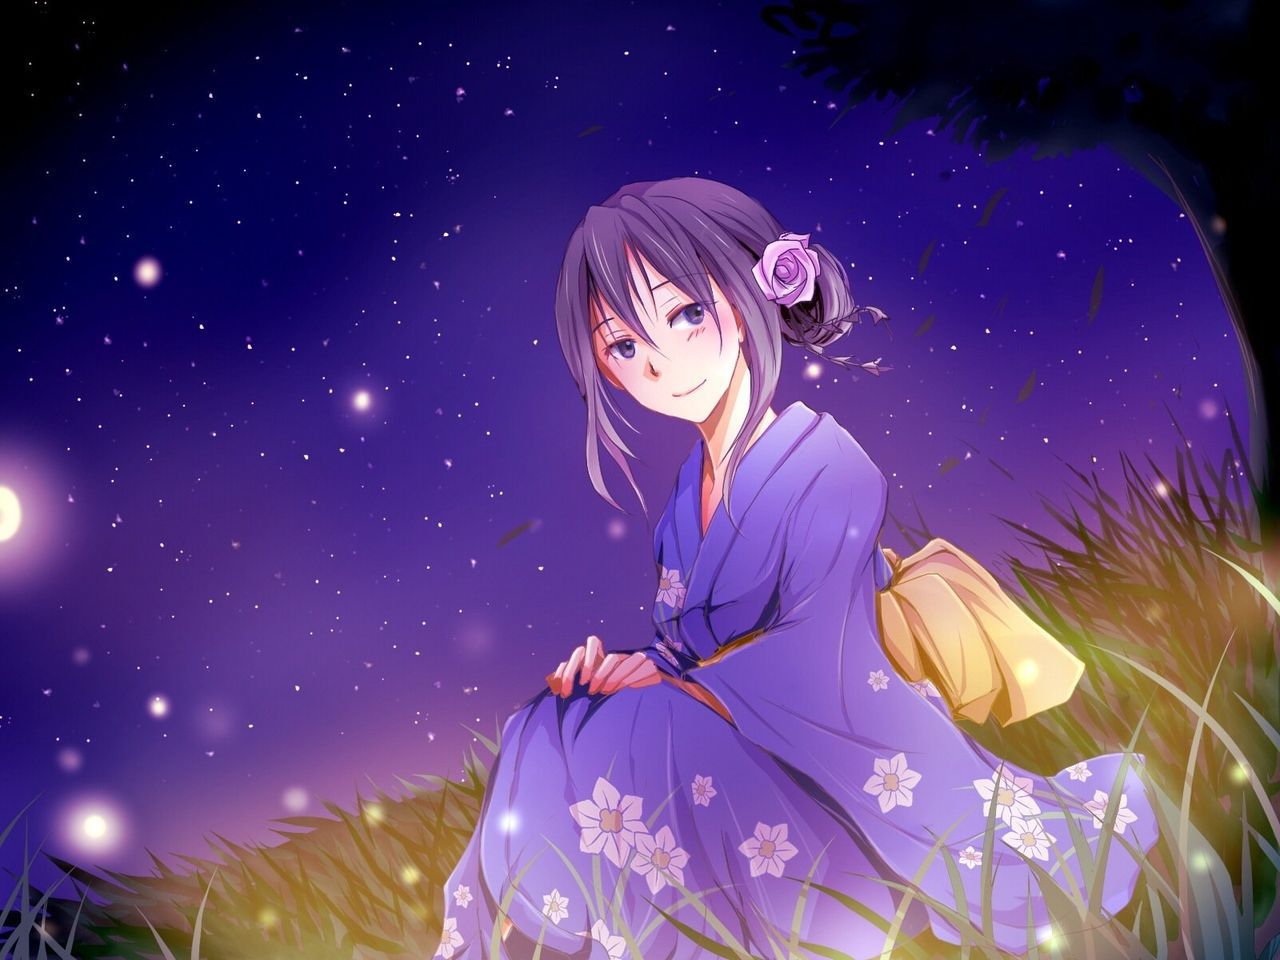 [2nd] Beautiful girl secondary image of Starry Sky 2 [non-erotic] 17